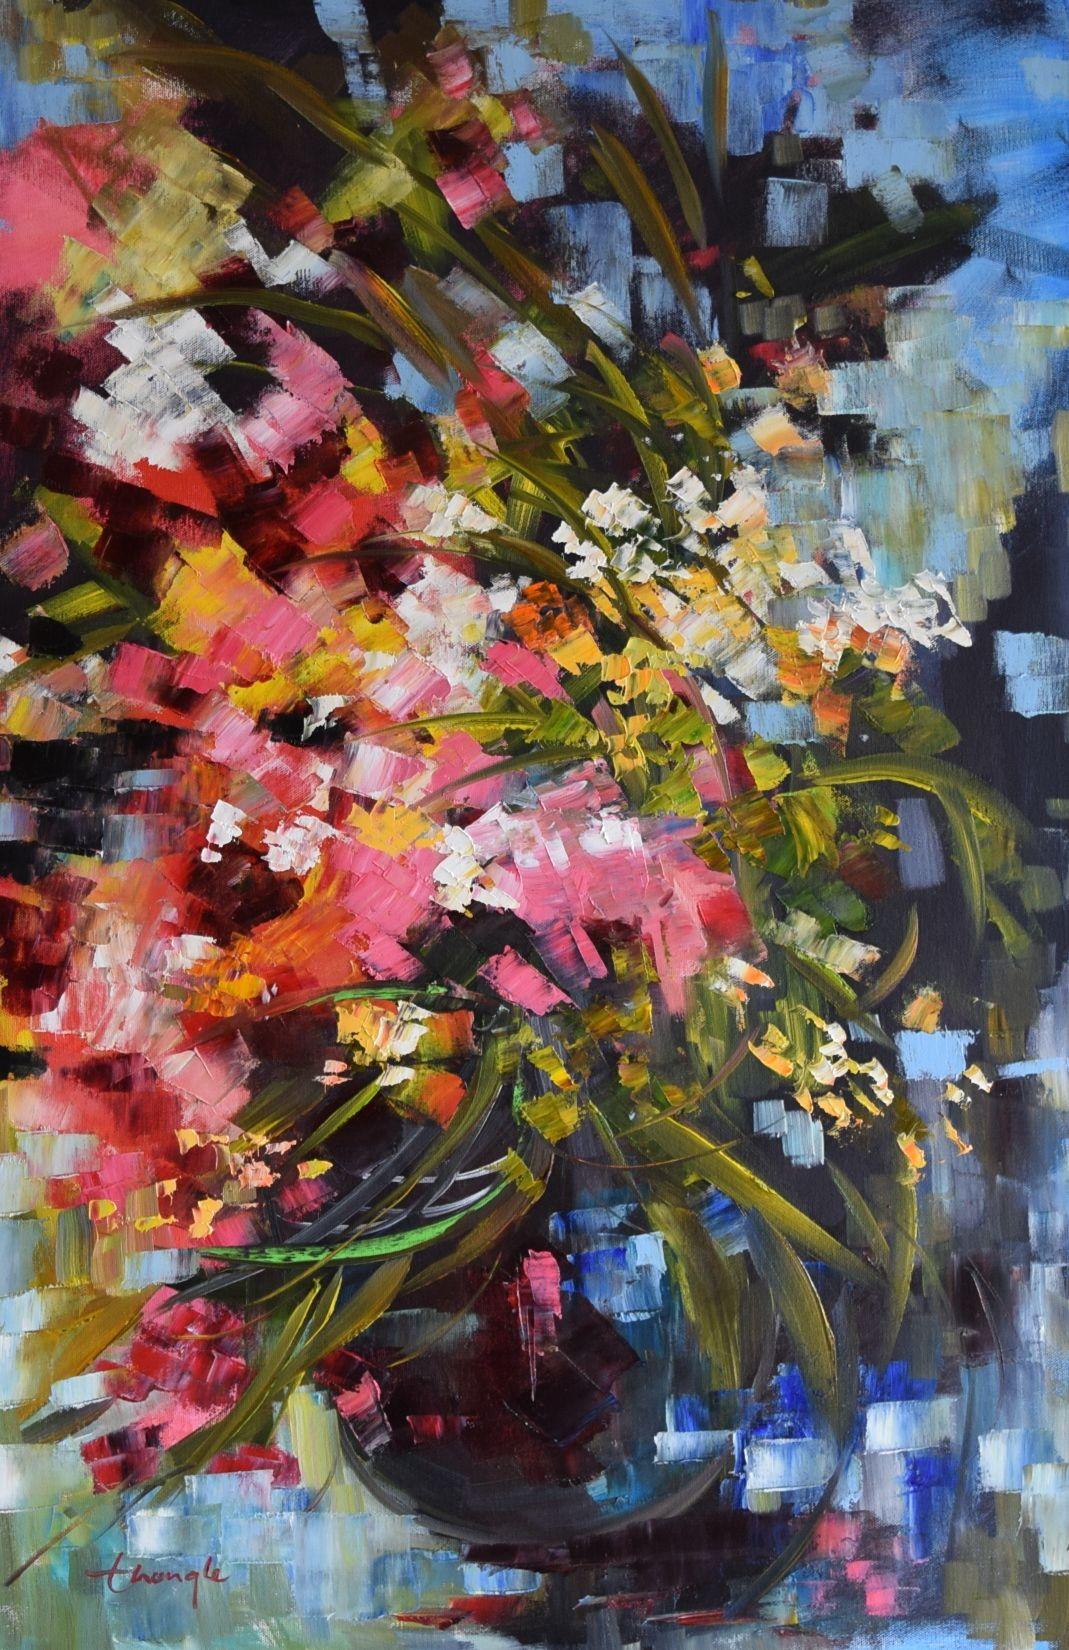 Thong Le Abstract Painting - Flowers, Painting, Oil on Canvas